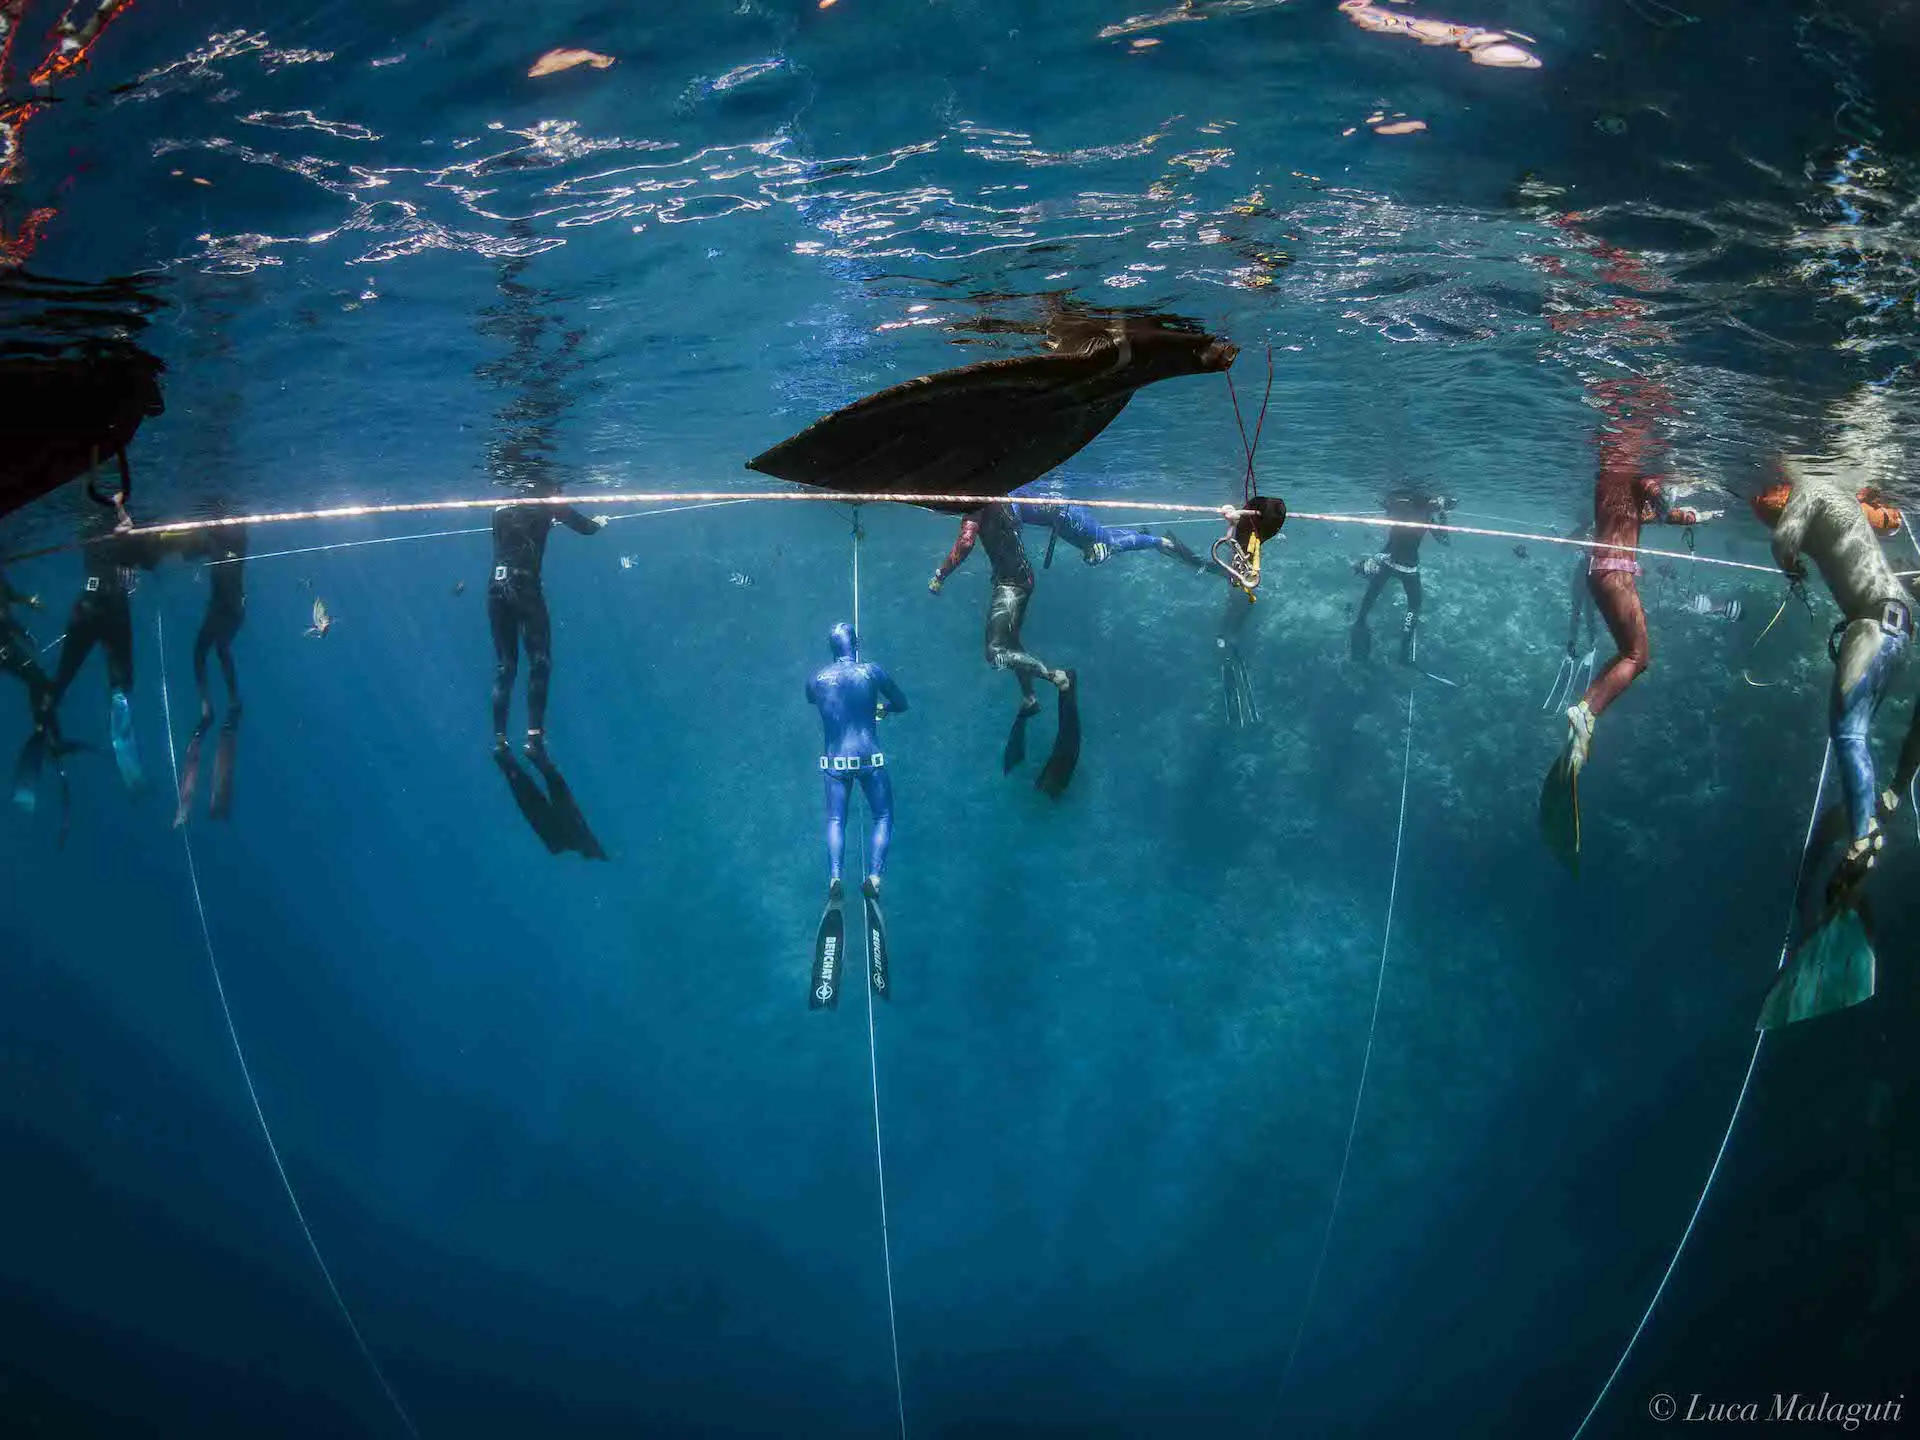 Safety Systems for Depth Freediving